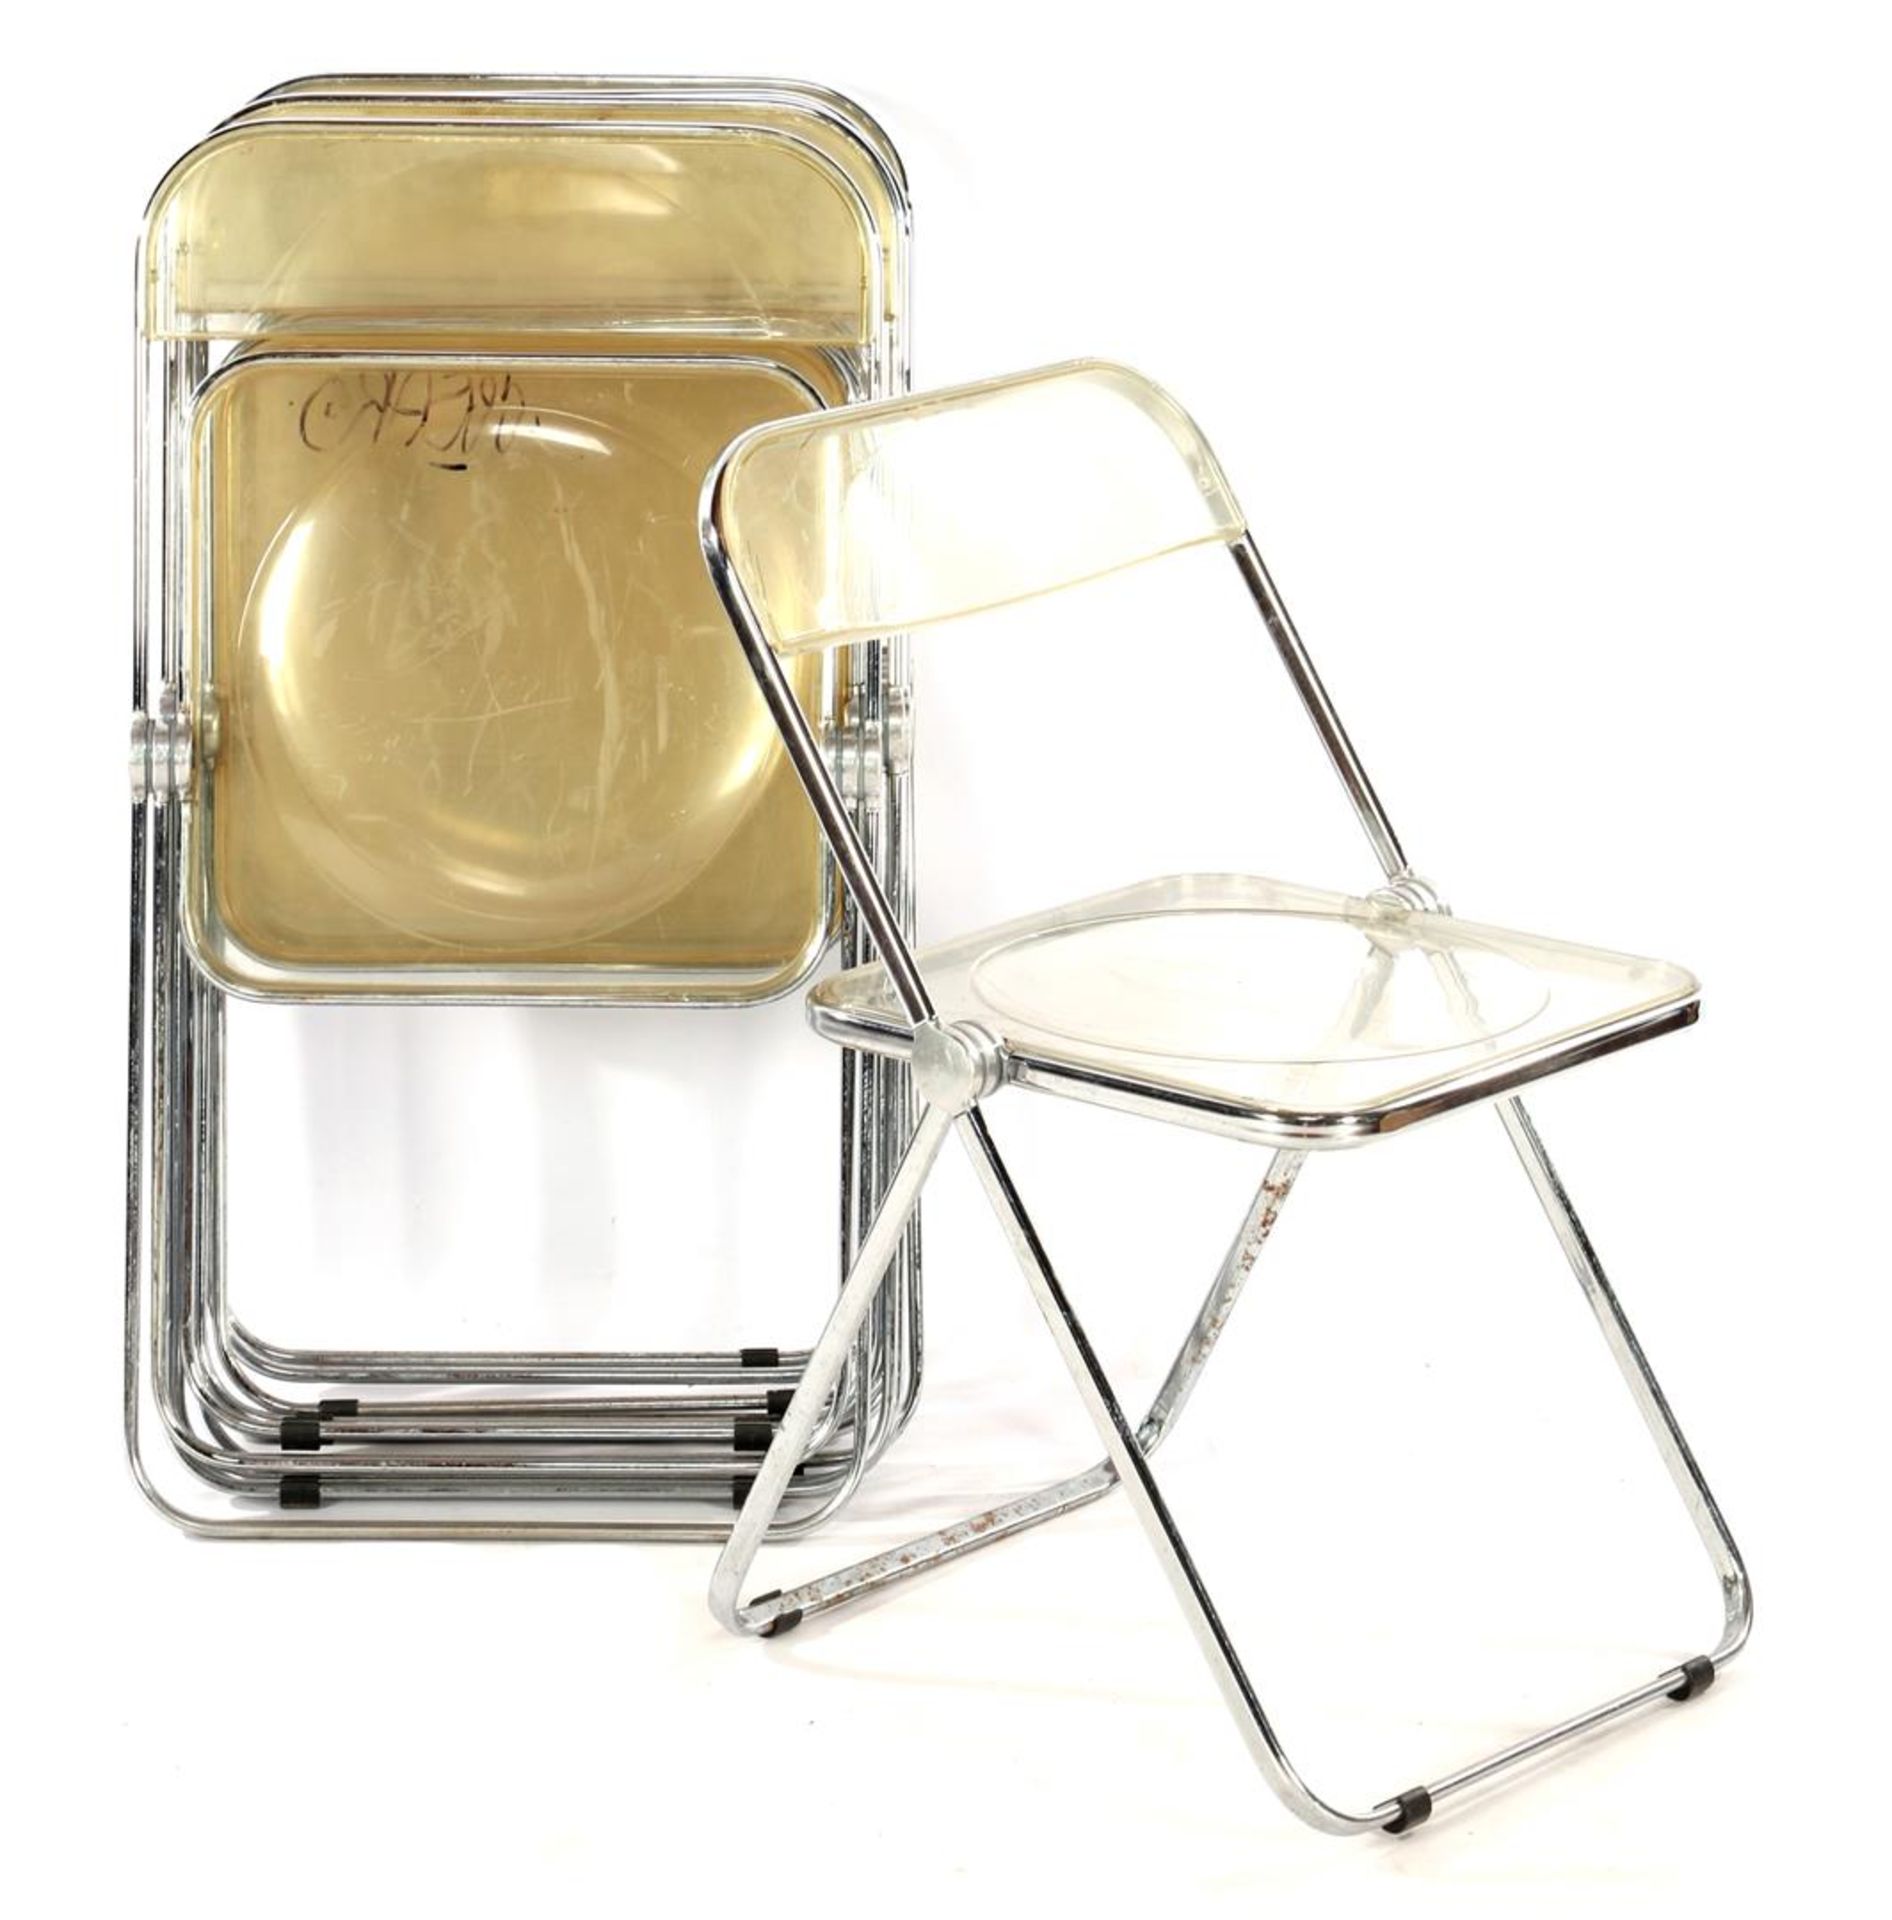 7 plastic folding chairs with chrome-plated metal edge